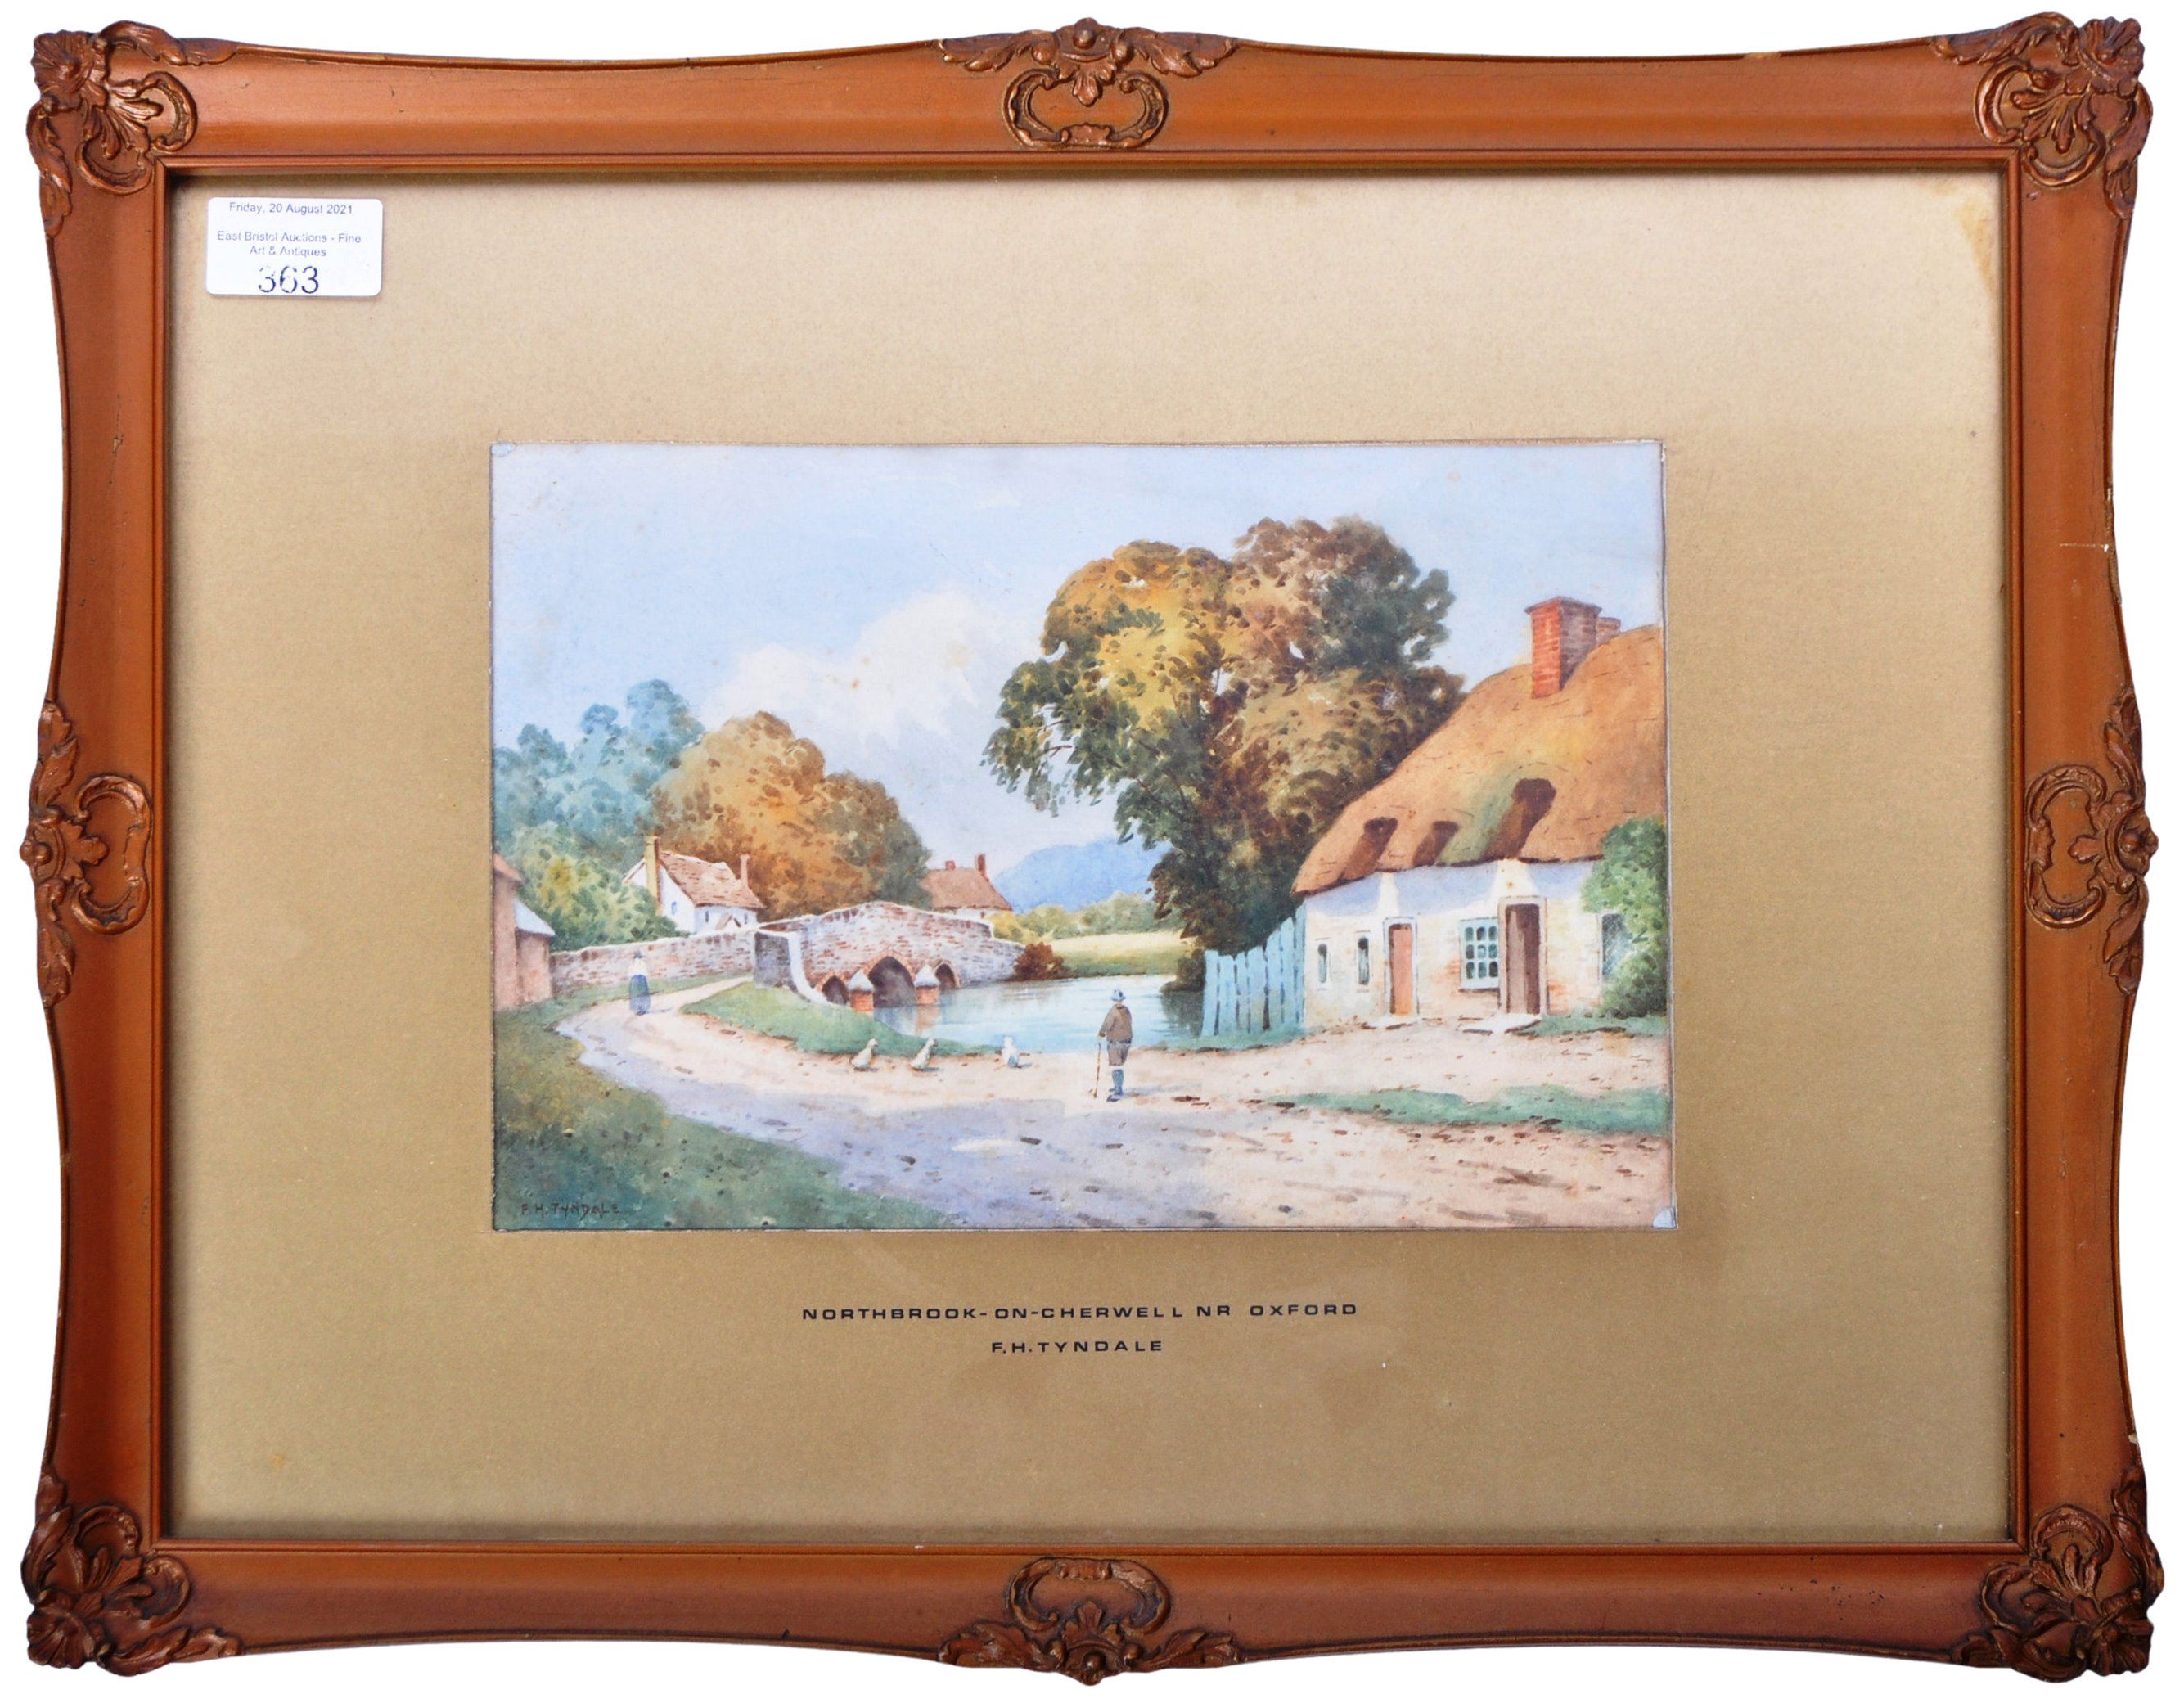 F.H. TYNDALE - 19TH CENTURY WATERCOLOUR PAINTING